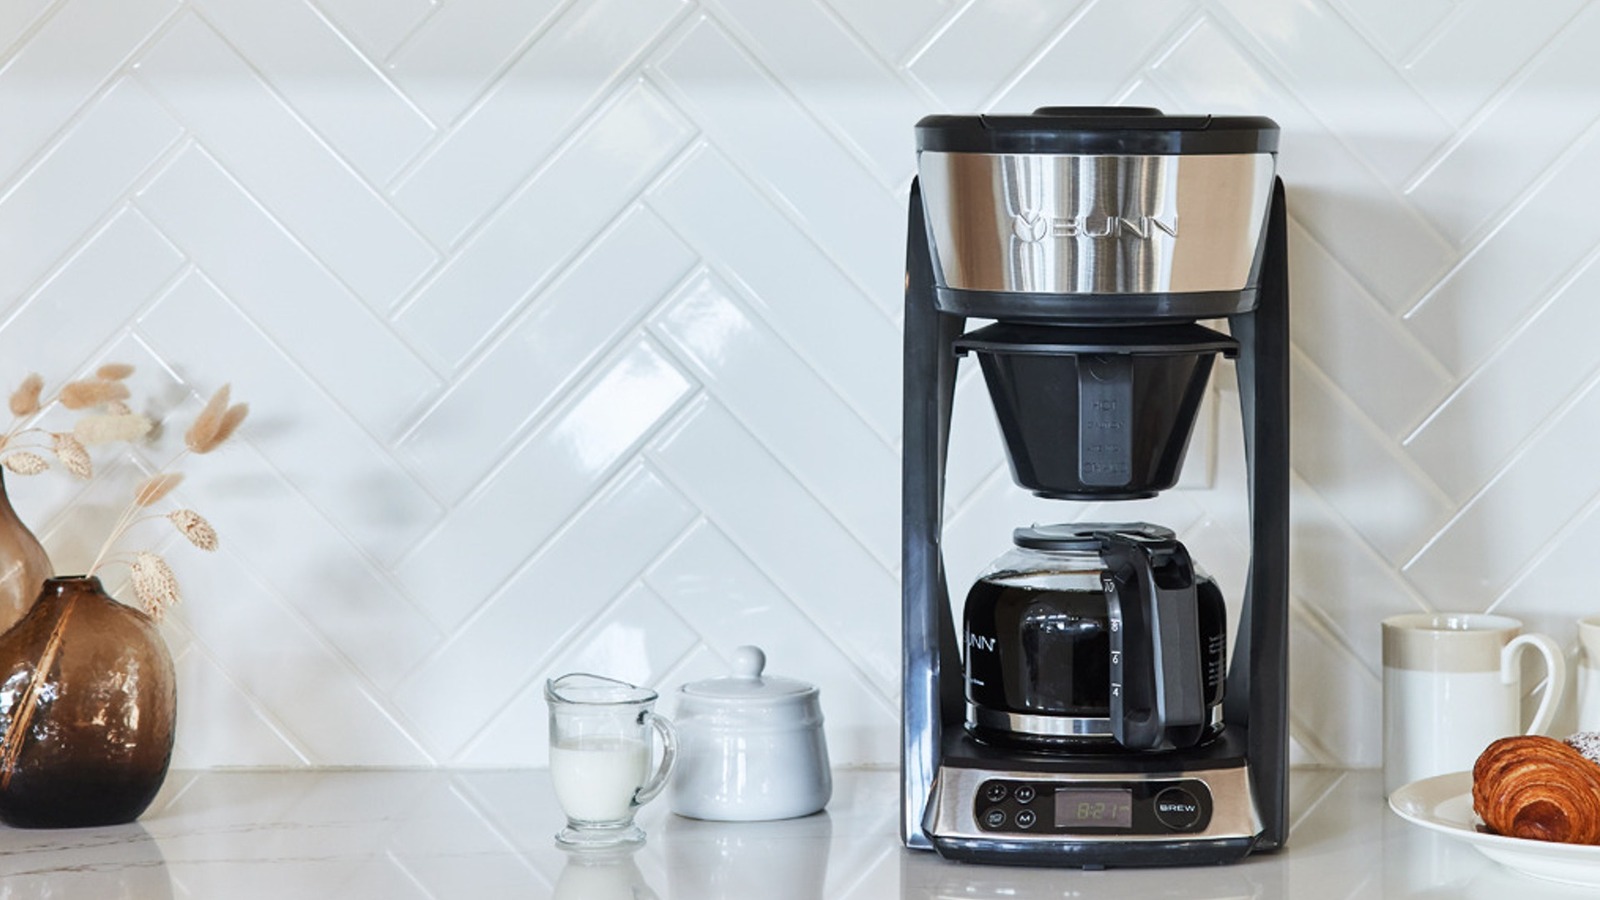 https://www.thedailymeal.com/img/gallery/how-to-get-your-bunn-coffee-maker-as-clean-as-a-whistle/l-intro-1696002098.jpg